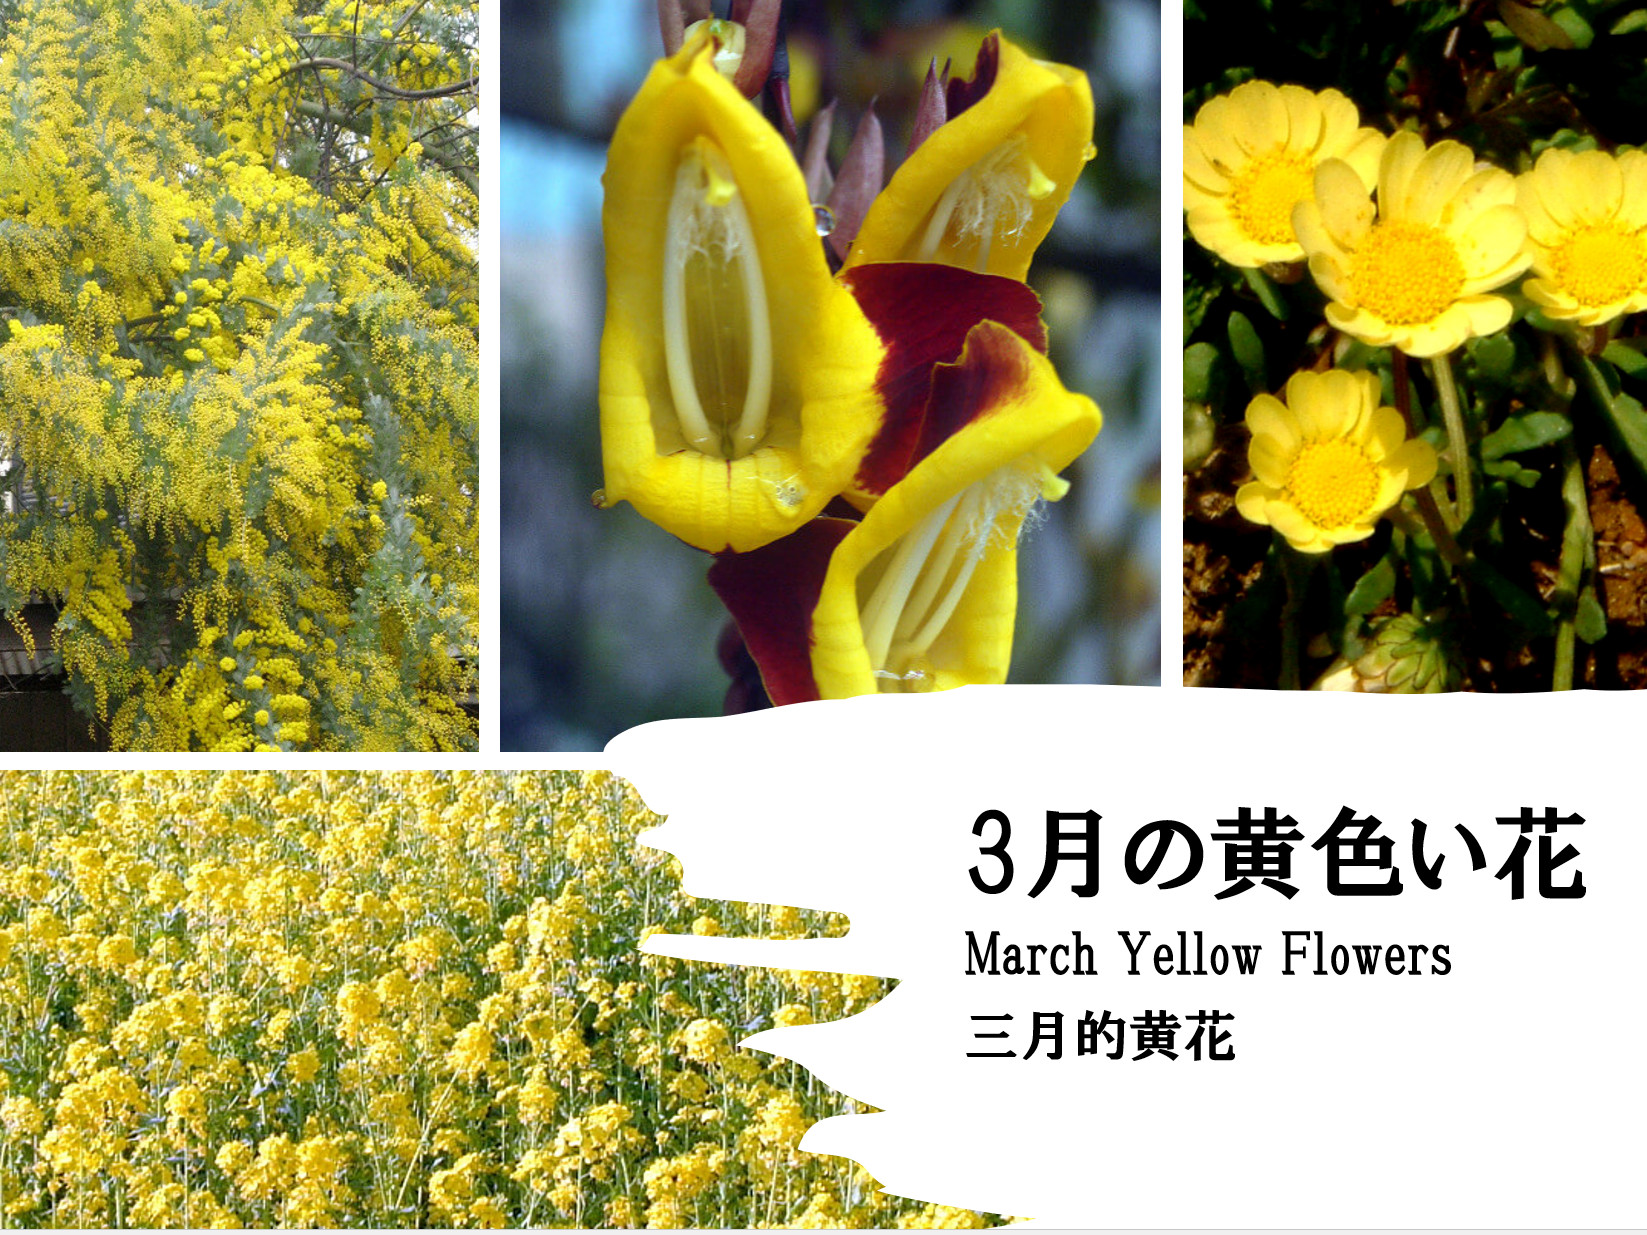 Yellow Flowers that bloom in March